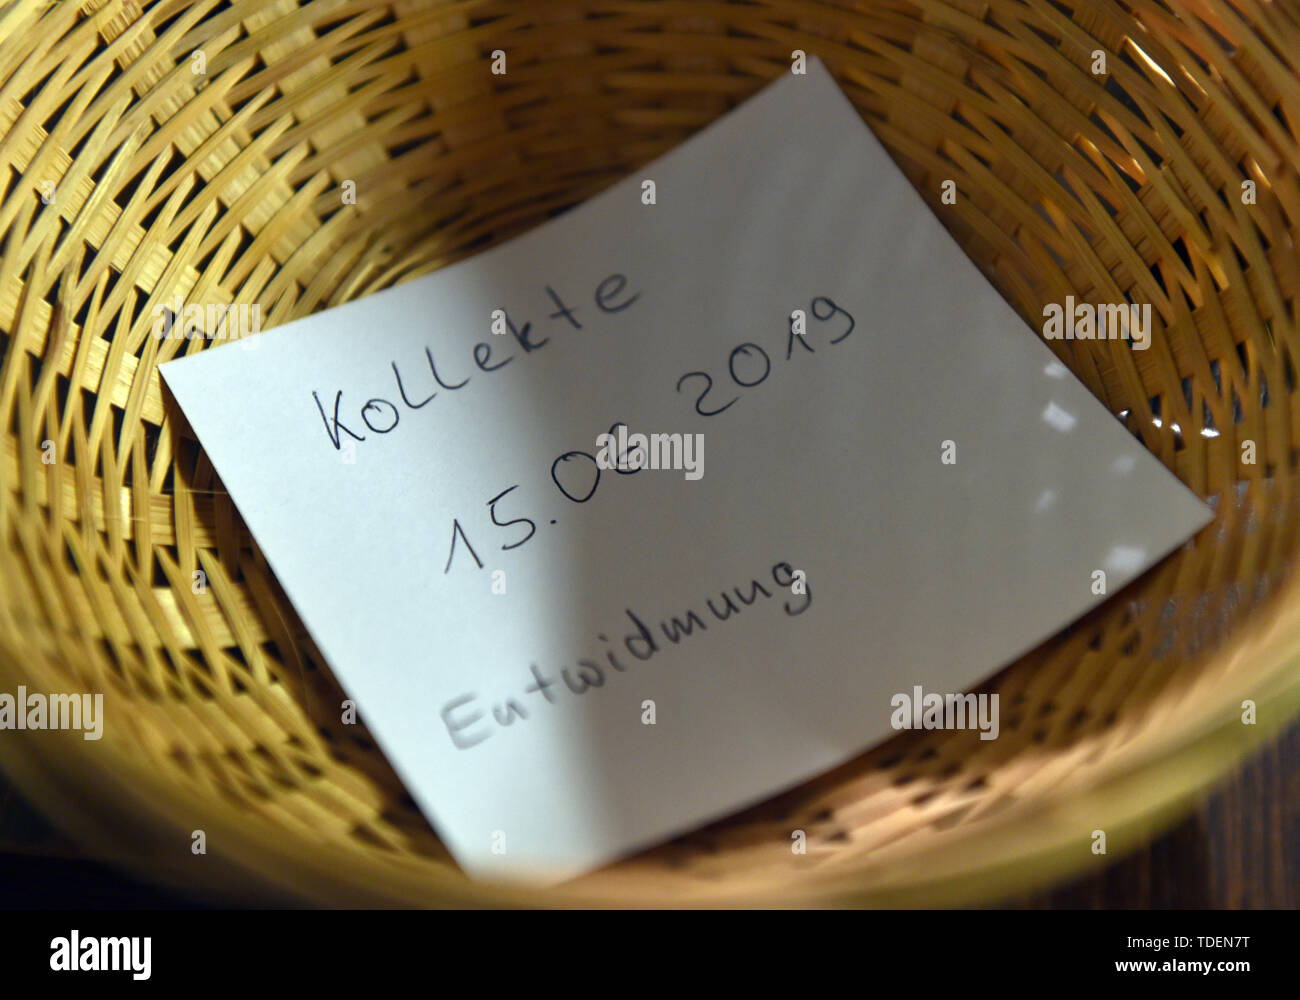 Merzenich Morschenich, Germany. 15th June, 2019. A basket for the collection during the divine service for the dedication of St. Lambert's Church stands on a table. This church is the last Catholic church to be dedicated to open-cast lignite mining. Credit: Caroline Seidel/dpa/Alamy Live News Stock Photo